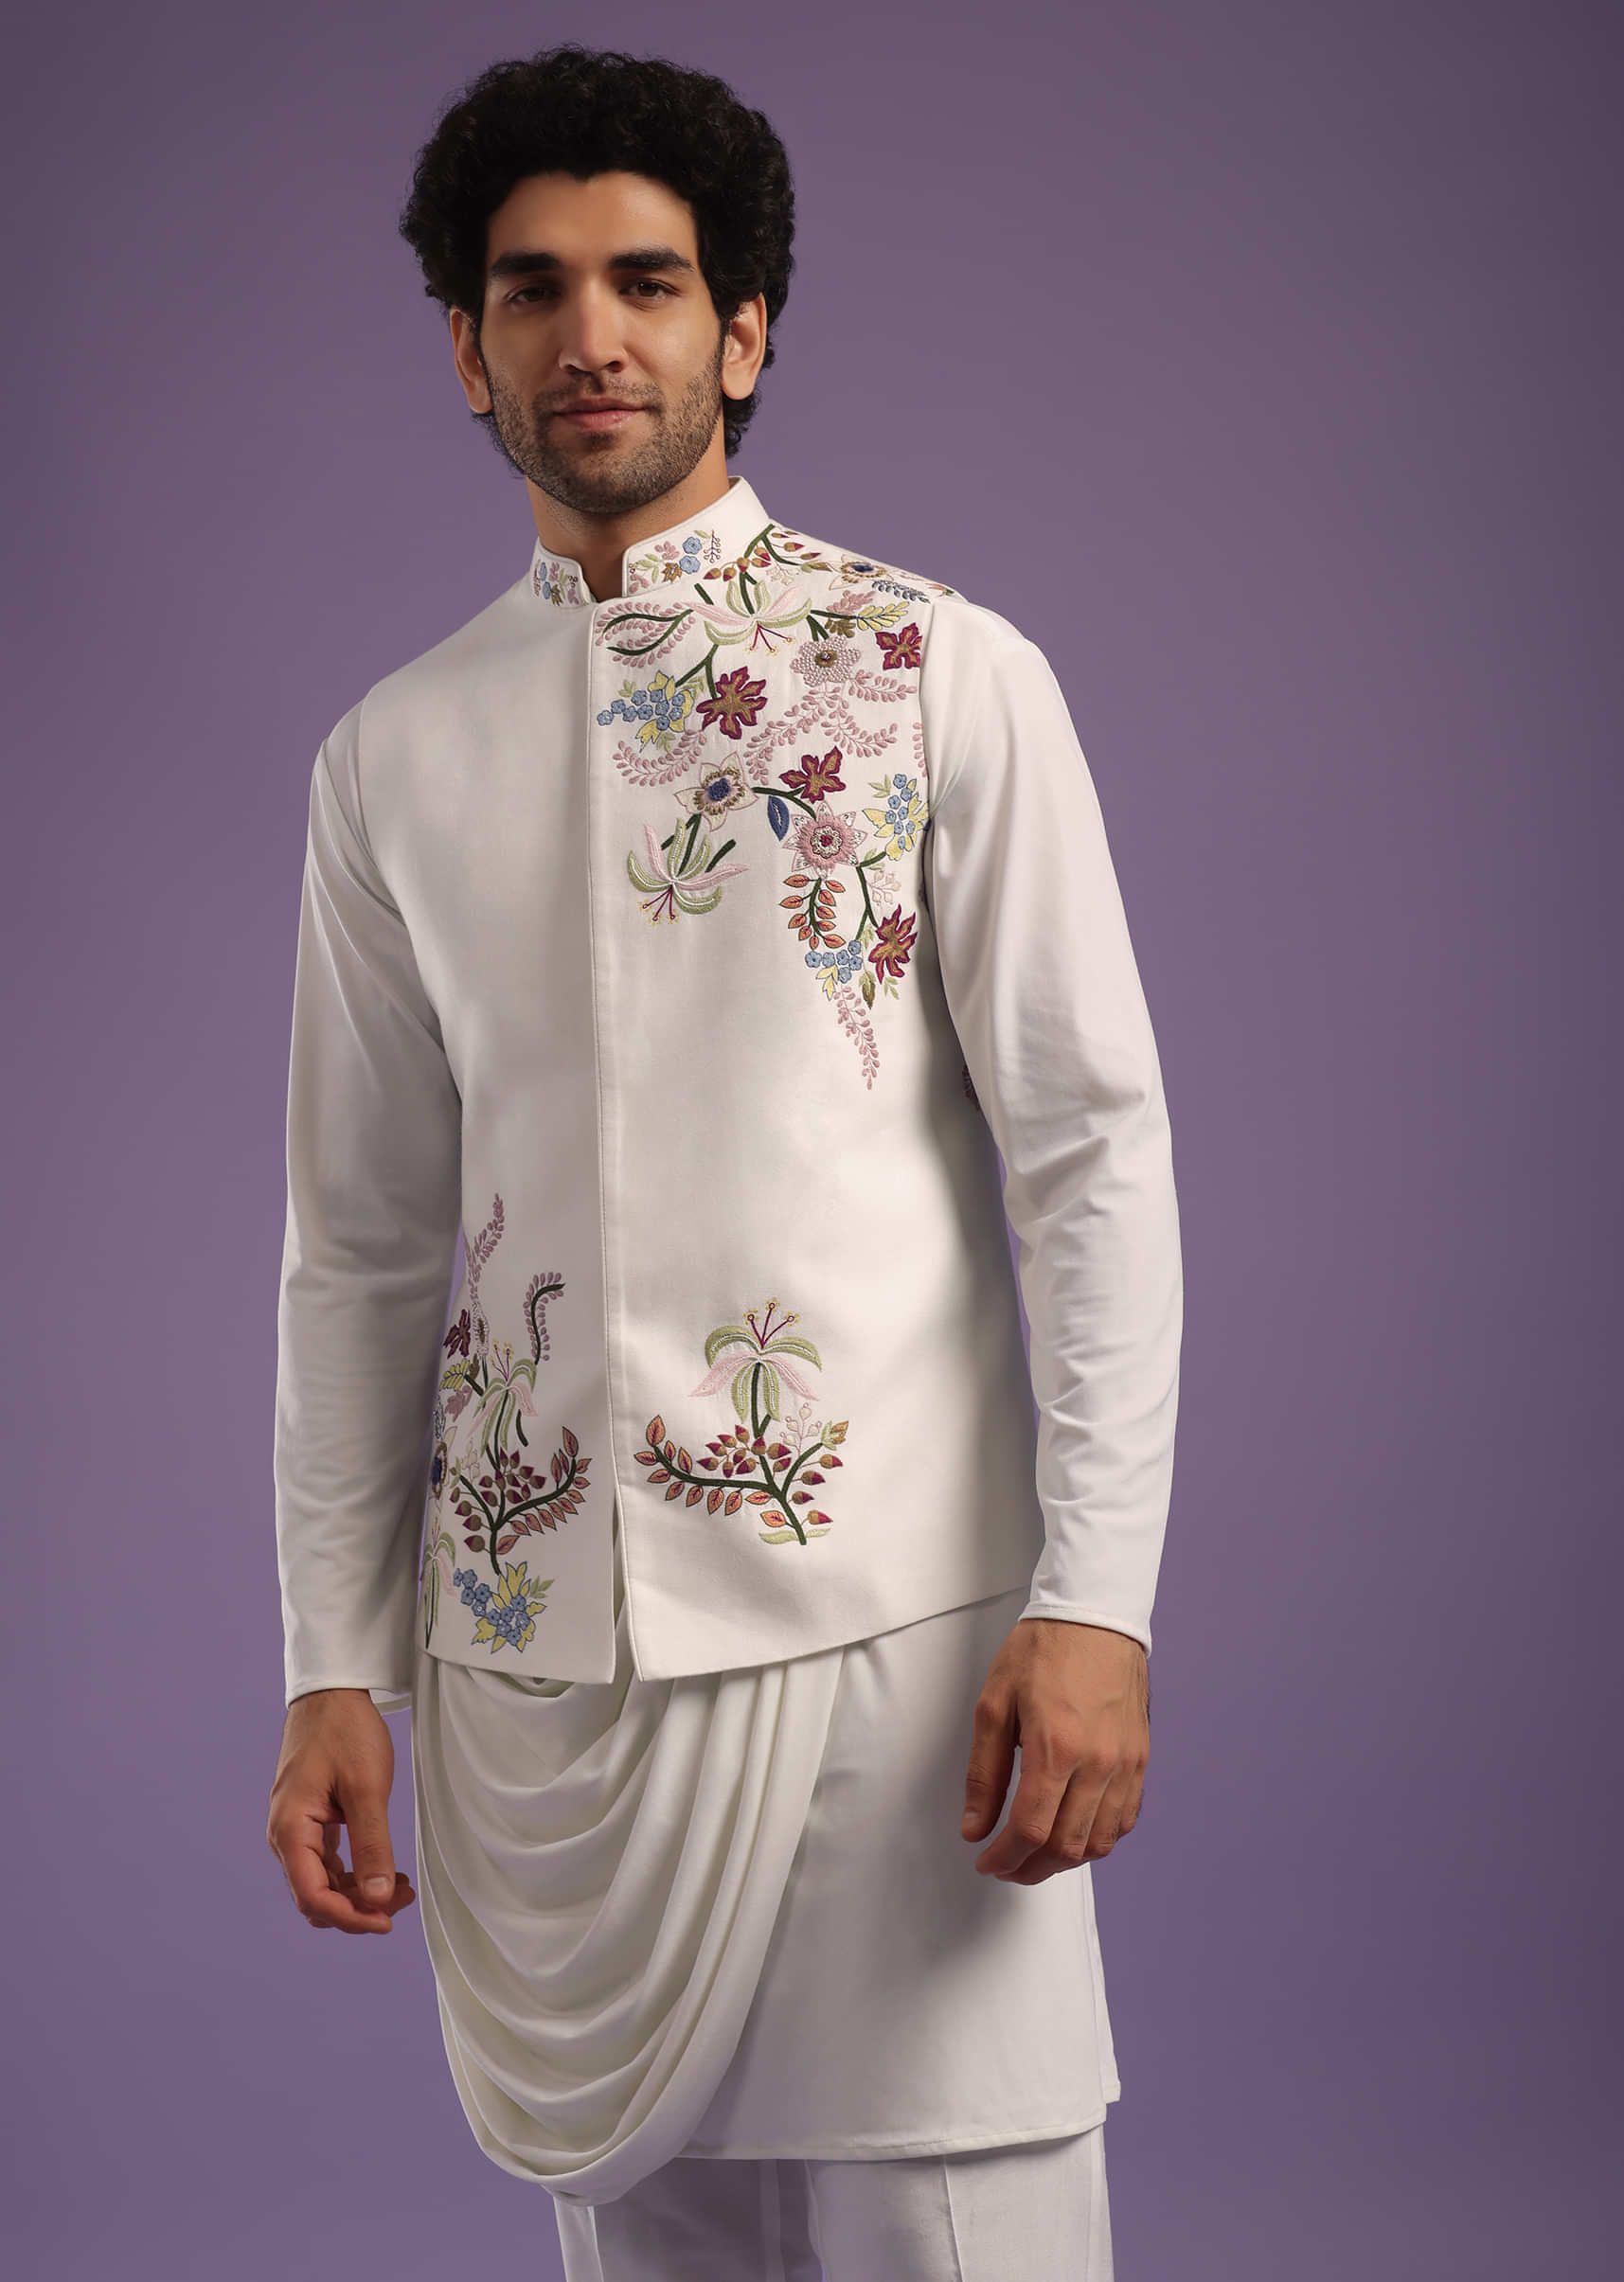 Daisy White Jacket Kurta Set In Rayon With Thread Embroidery In A Floral Pattern